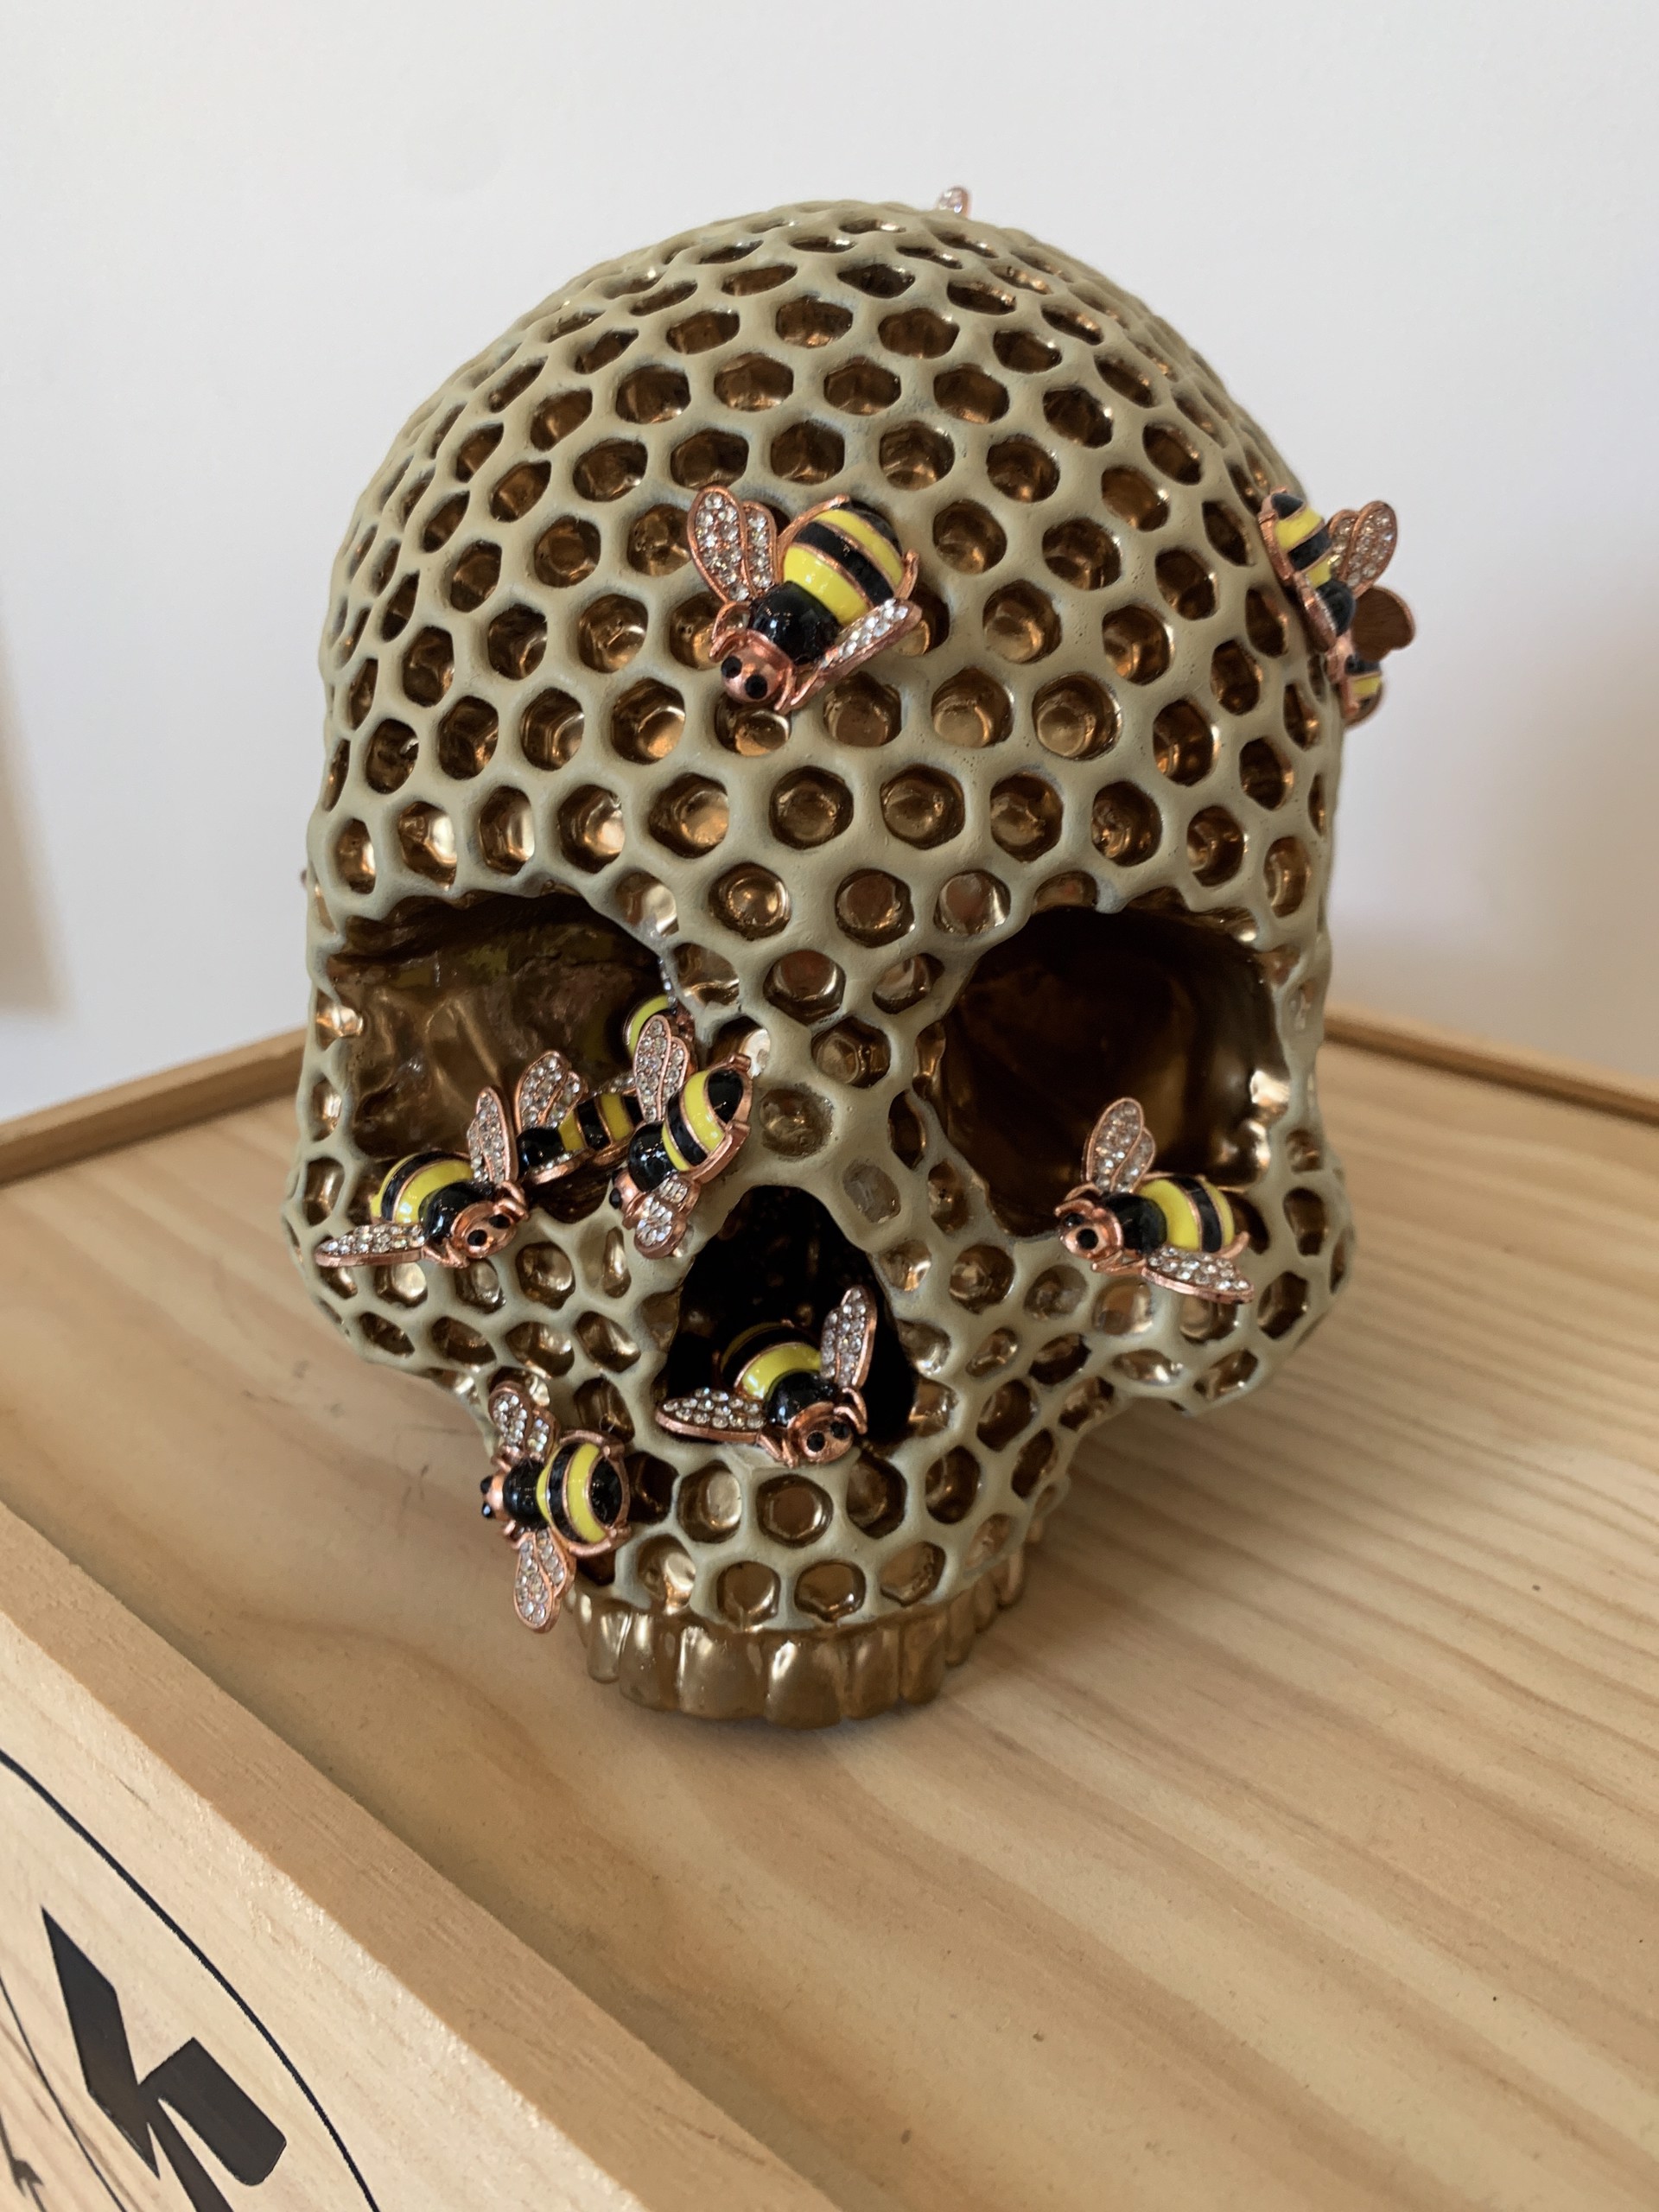 Beehive Skull by Jack Of The Dust